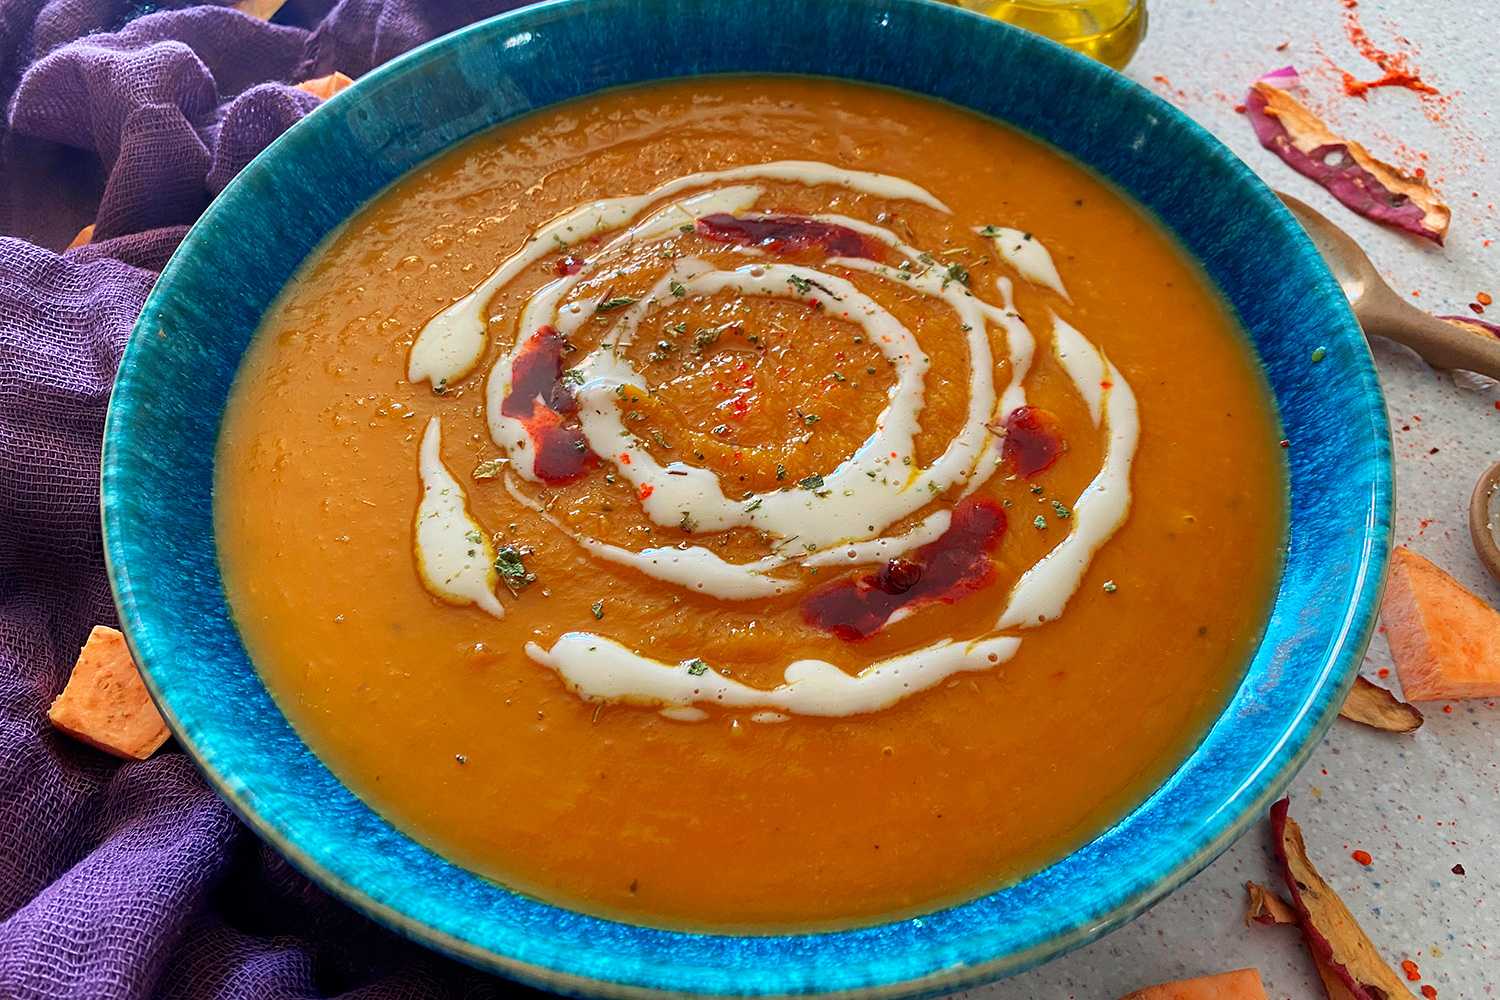 Blended orange soup topped with sour cream and spices